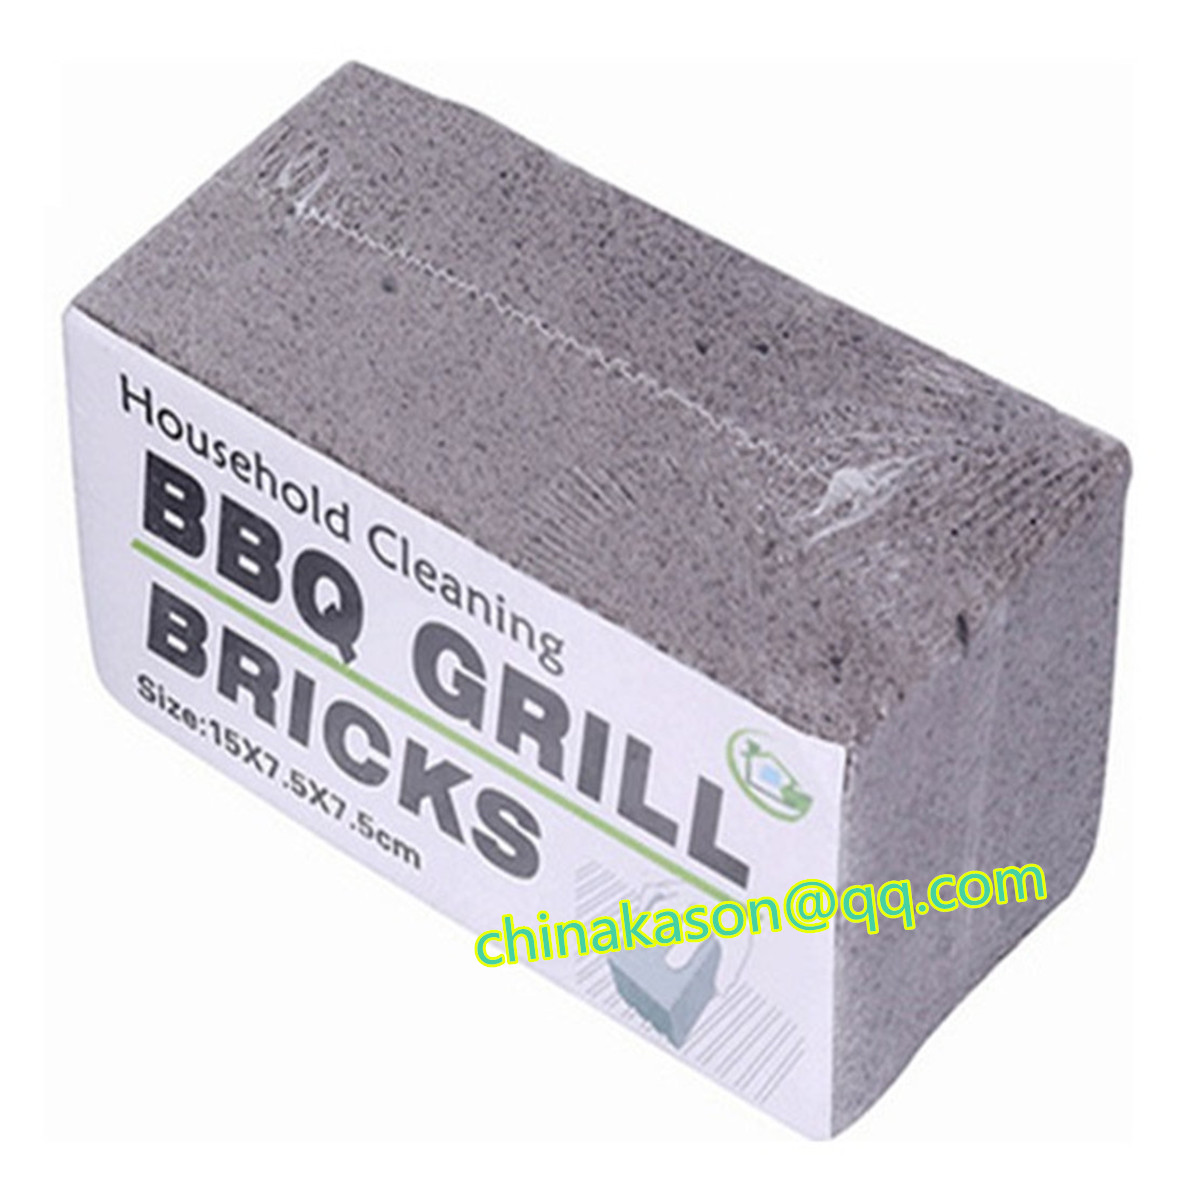 Grill Cleaning Brick Home & Kitchen use